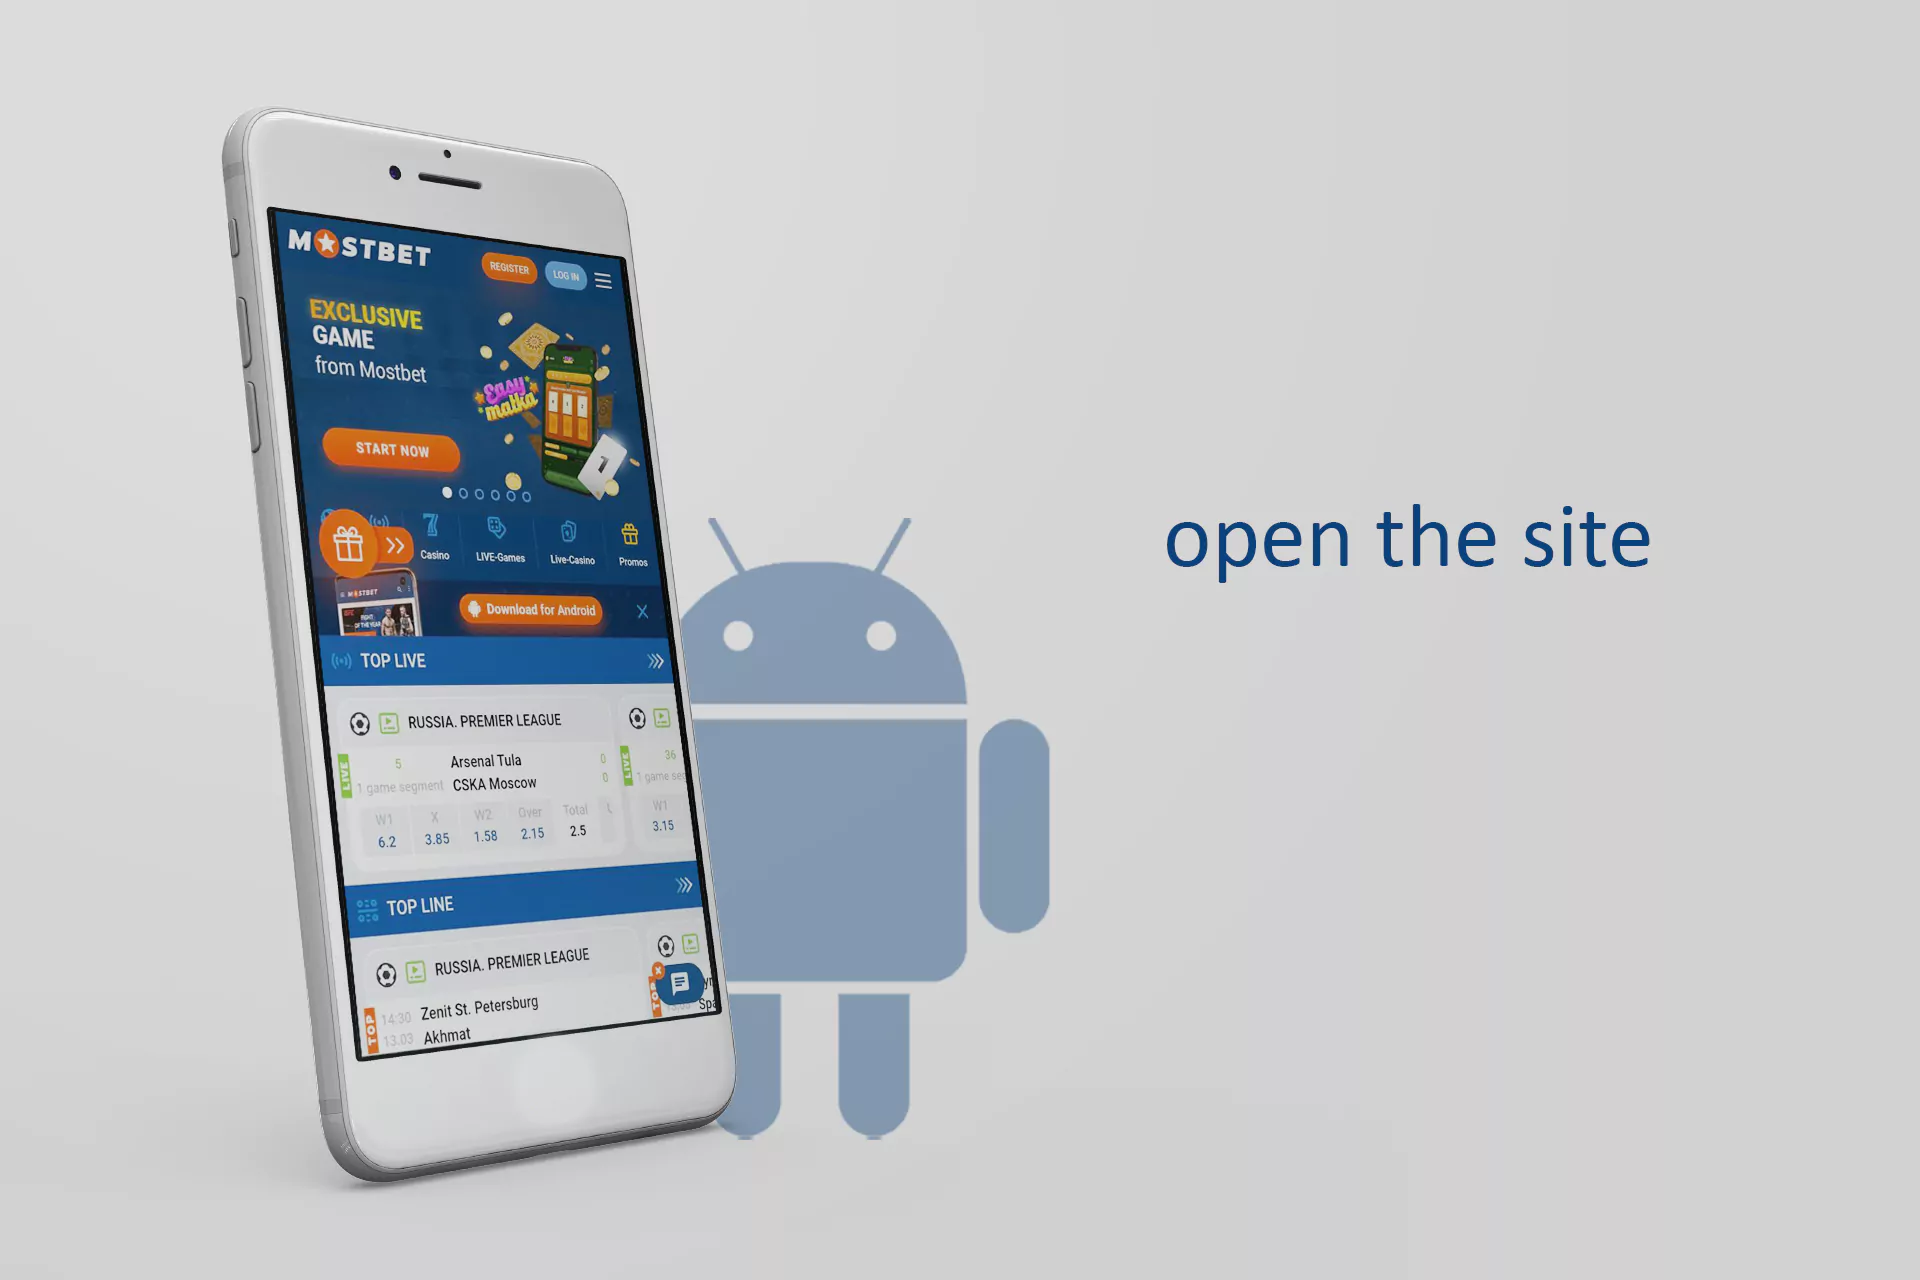 Open the Mostbet site in a browser on your phone.